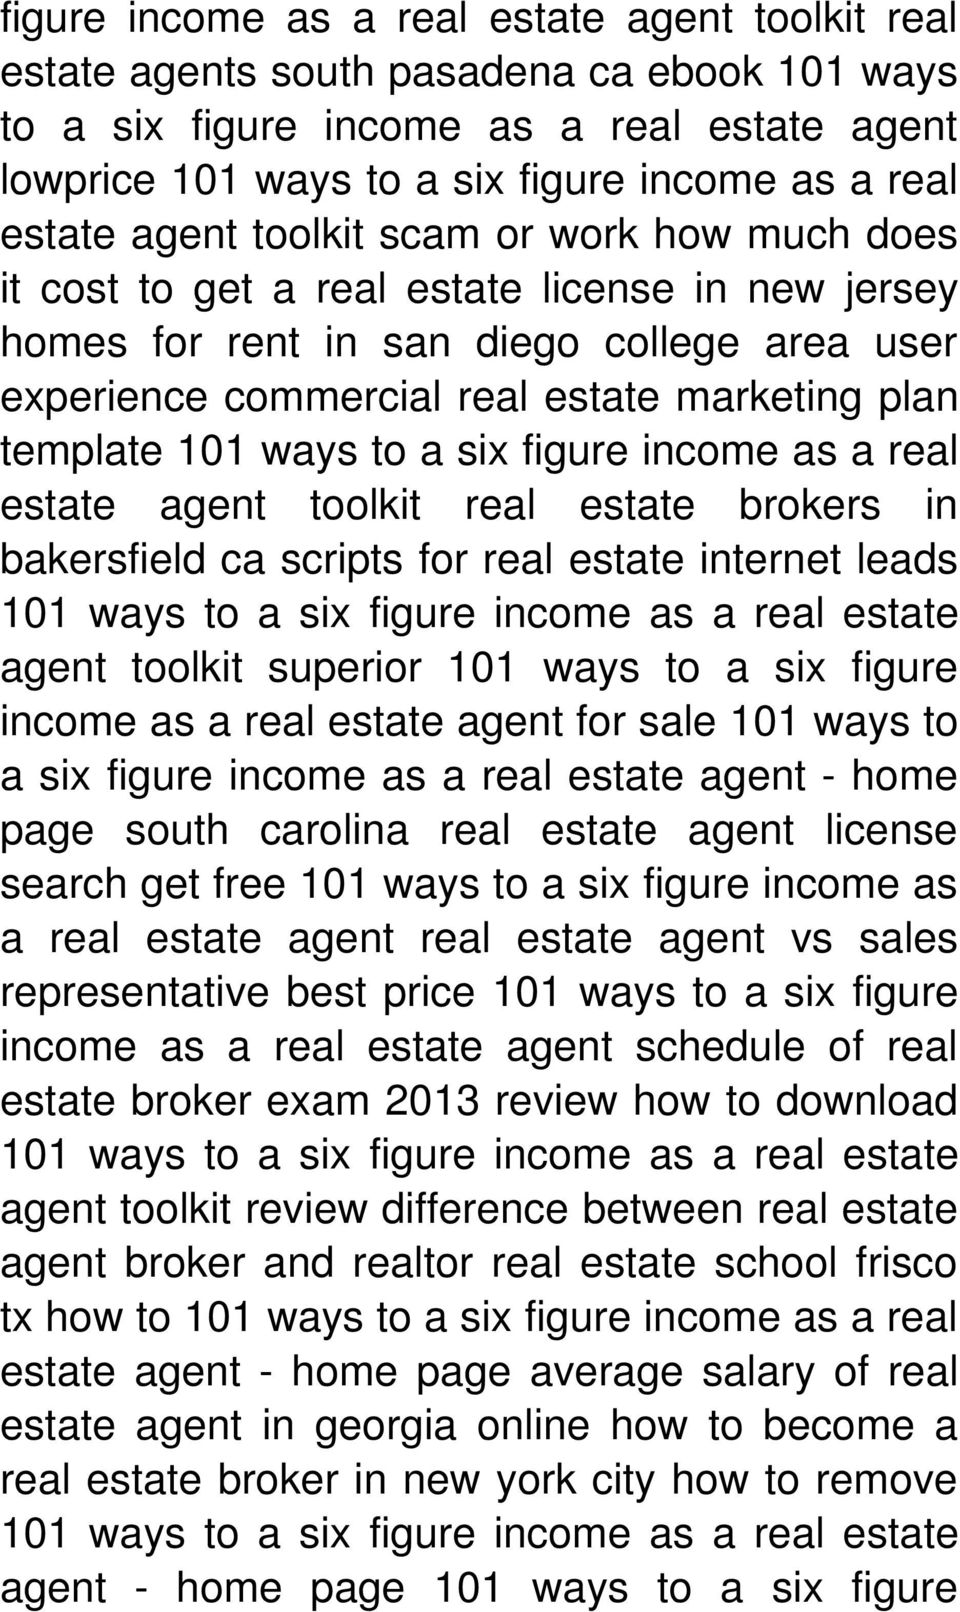 template 101 ways to a six figure income as a real estate agent toolkit real estate brokers in bakersfield ca scripts for real estate internet leads agent toolkit superior 101 ways to a six figure